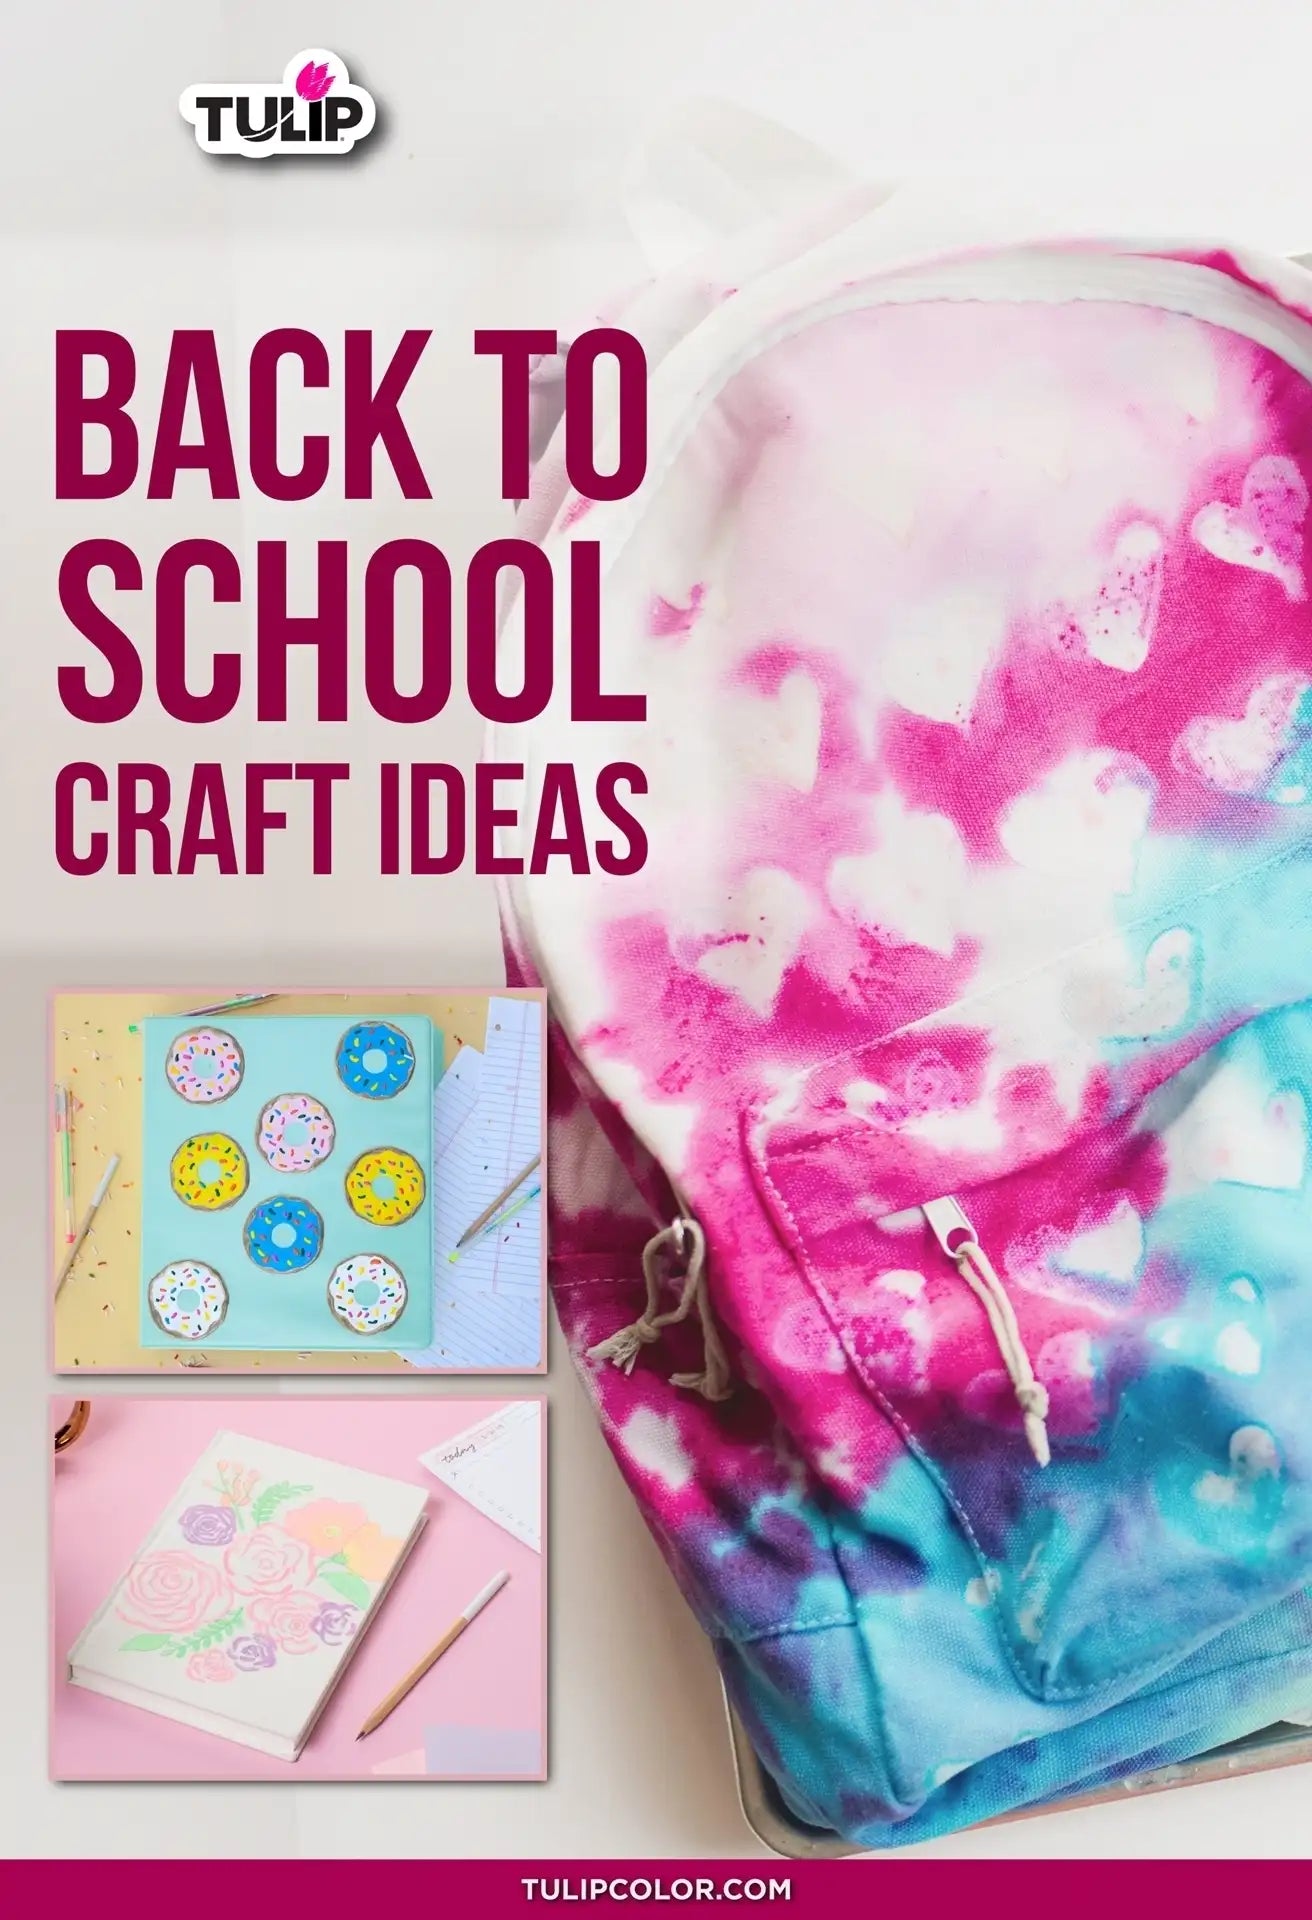 Back to School Craft Ideas for a Colorful School Year